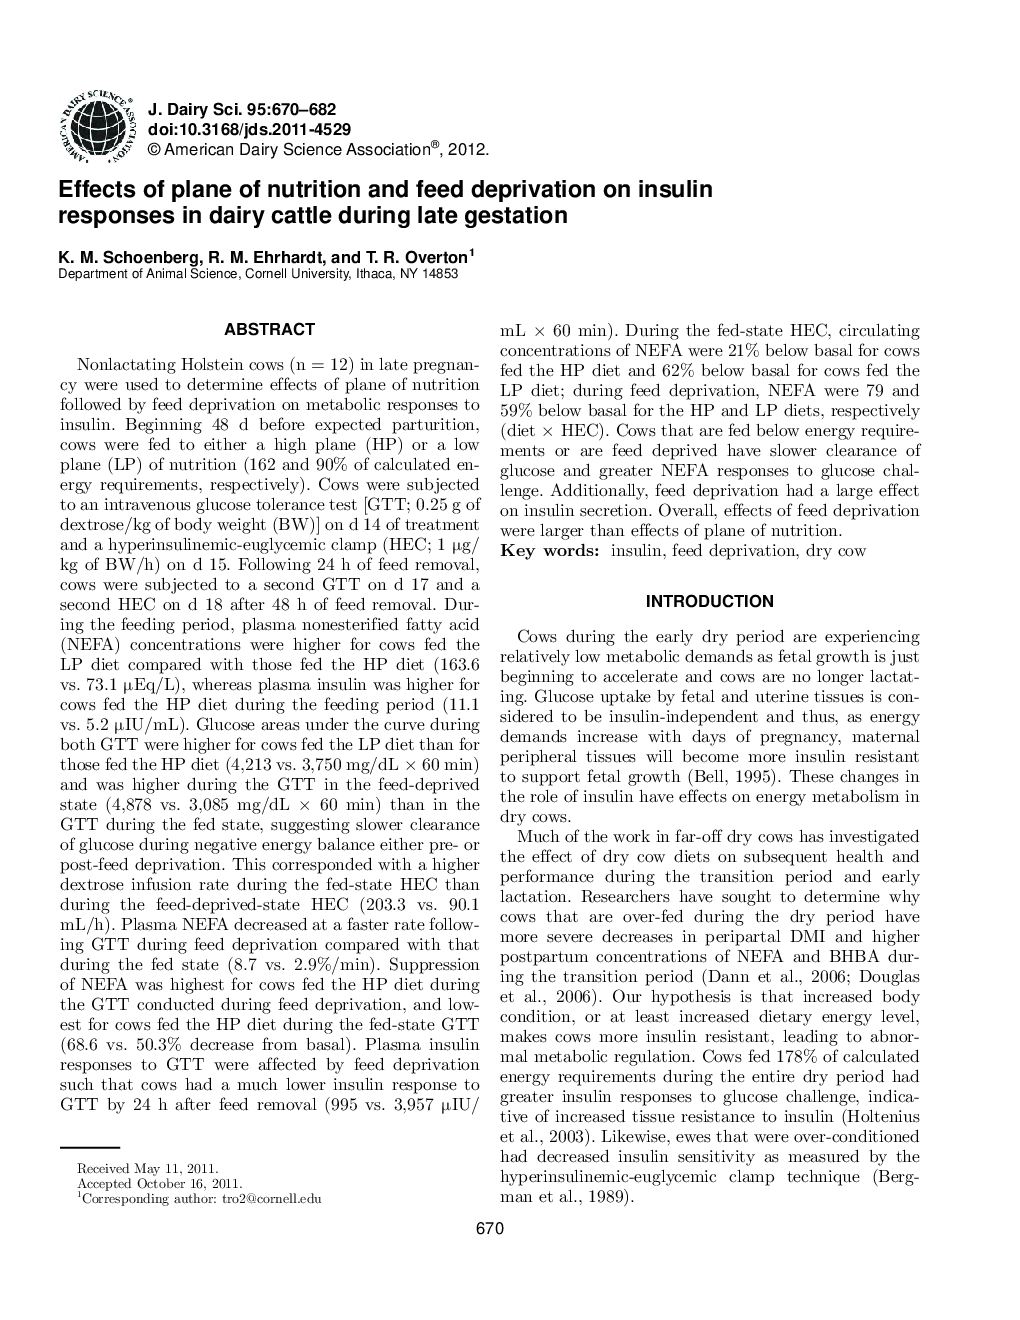 Effects of plane of nutrition and feed deprivation on insulin responses in dairy cattle during late gestation